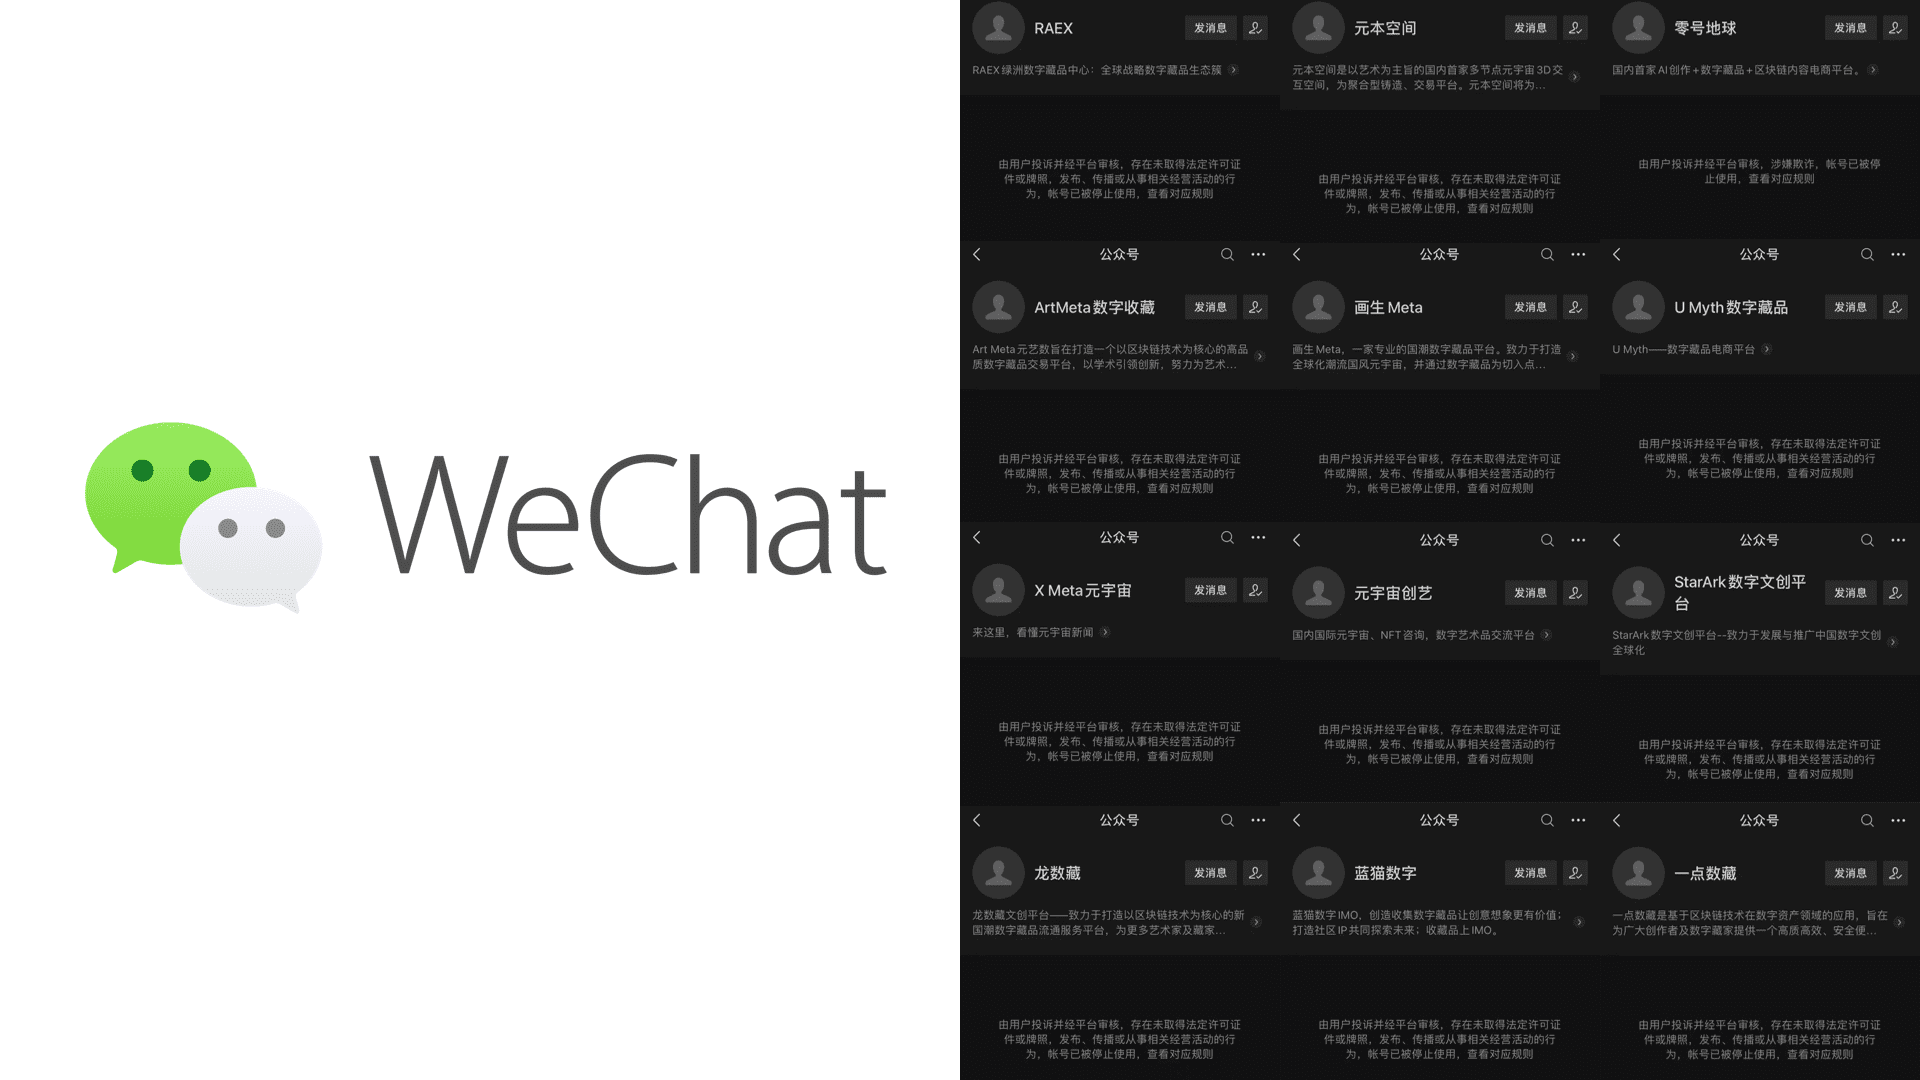 wechat-bans-nft-accounts-citing-crypto-speculation